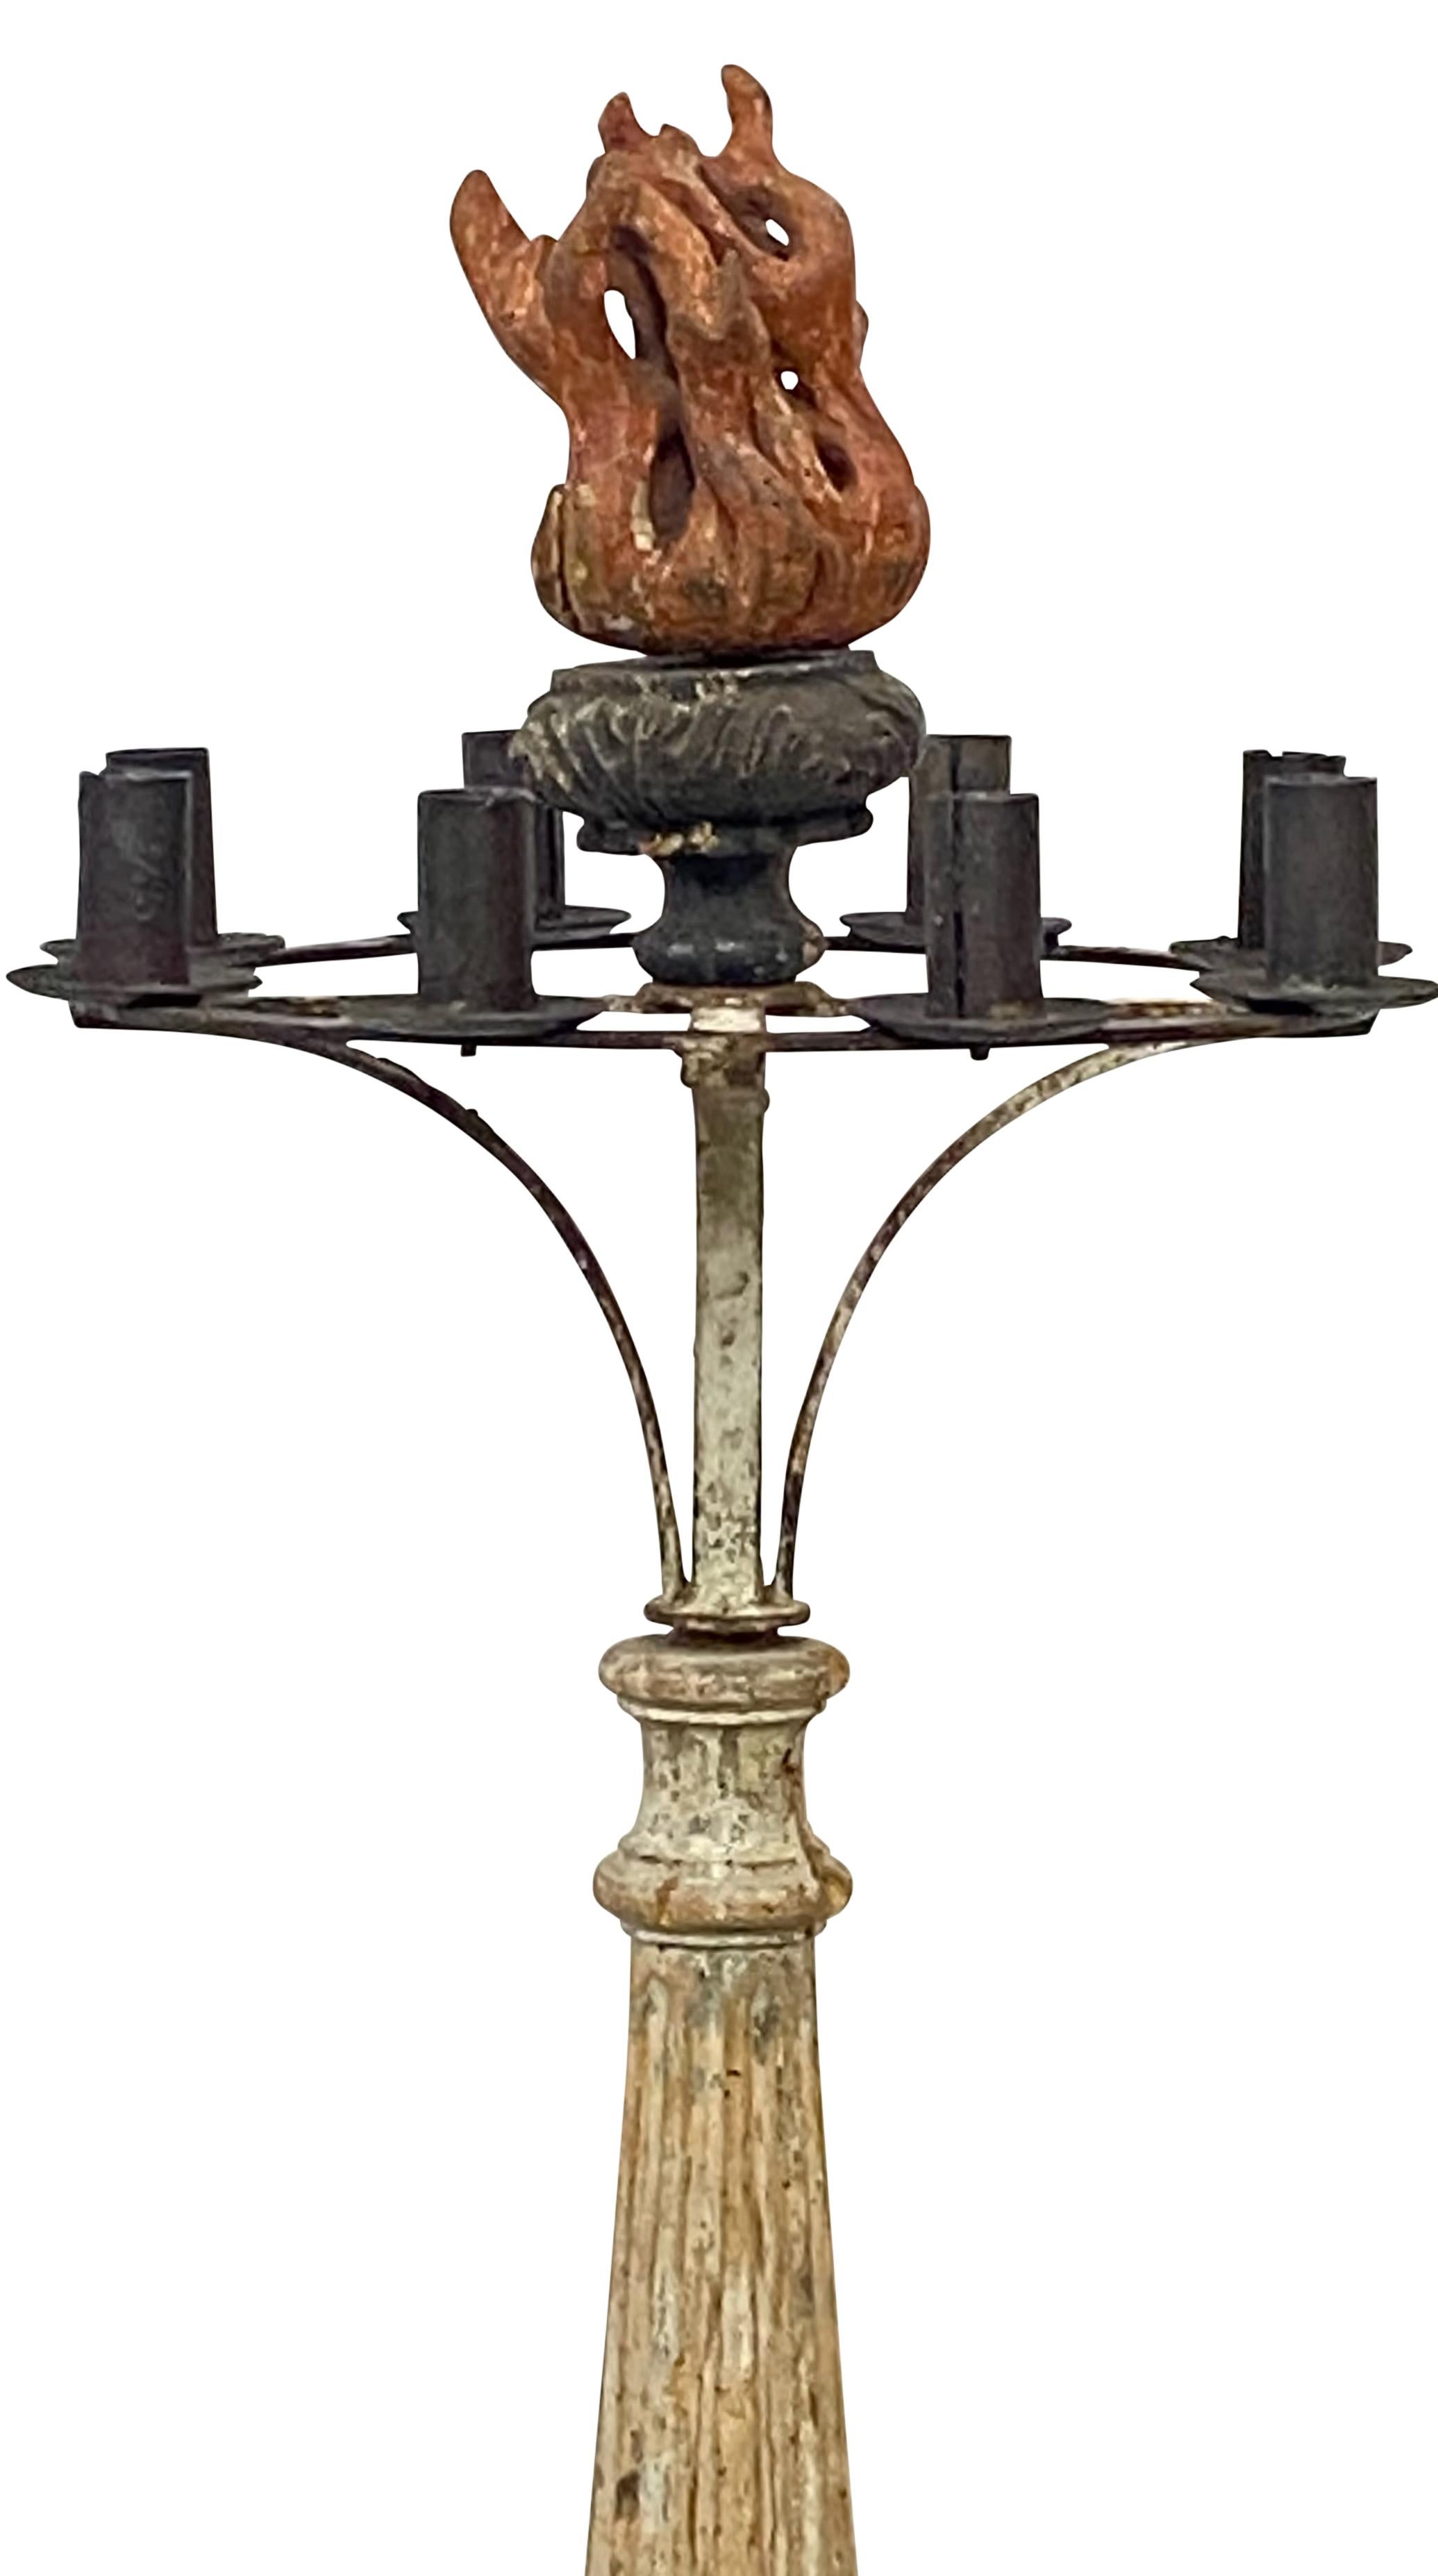 An interesting and unusual cast iron and carved pine 8 light candle stand with a large wonderfully carved wood flame finial.
Remnants of old paint on the cast iron base, the support was most likely gilded at one time but now worn away.
This stand